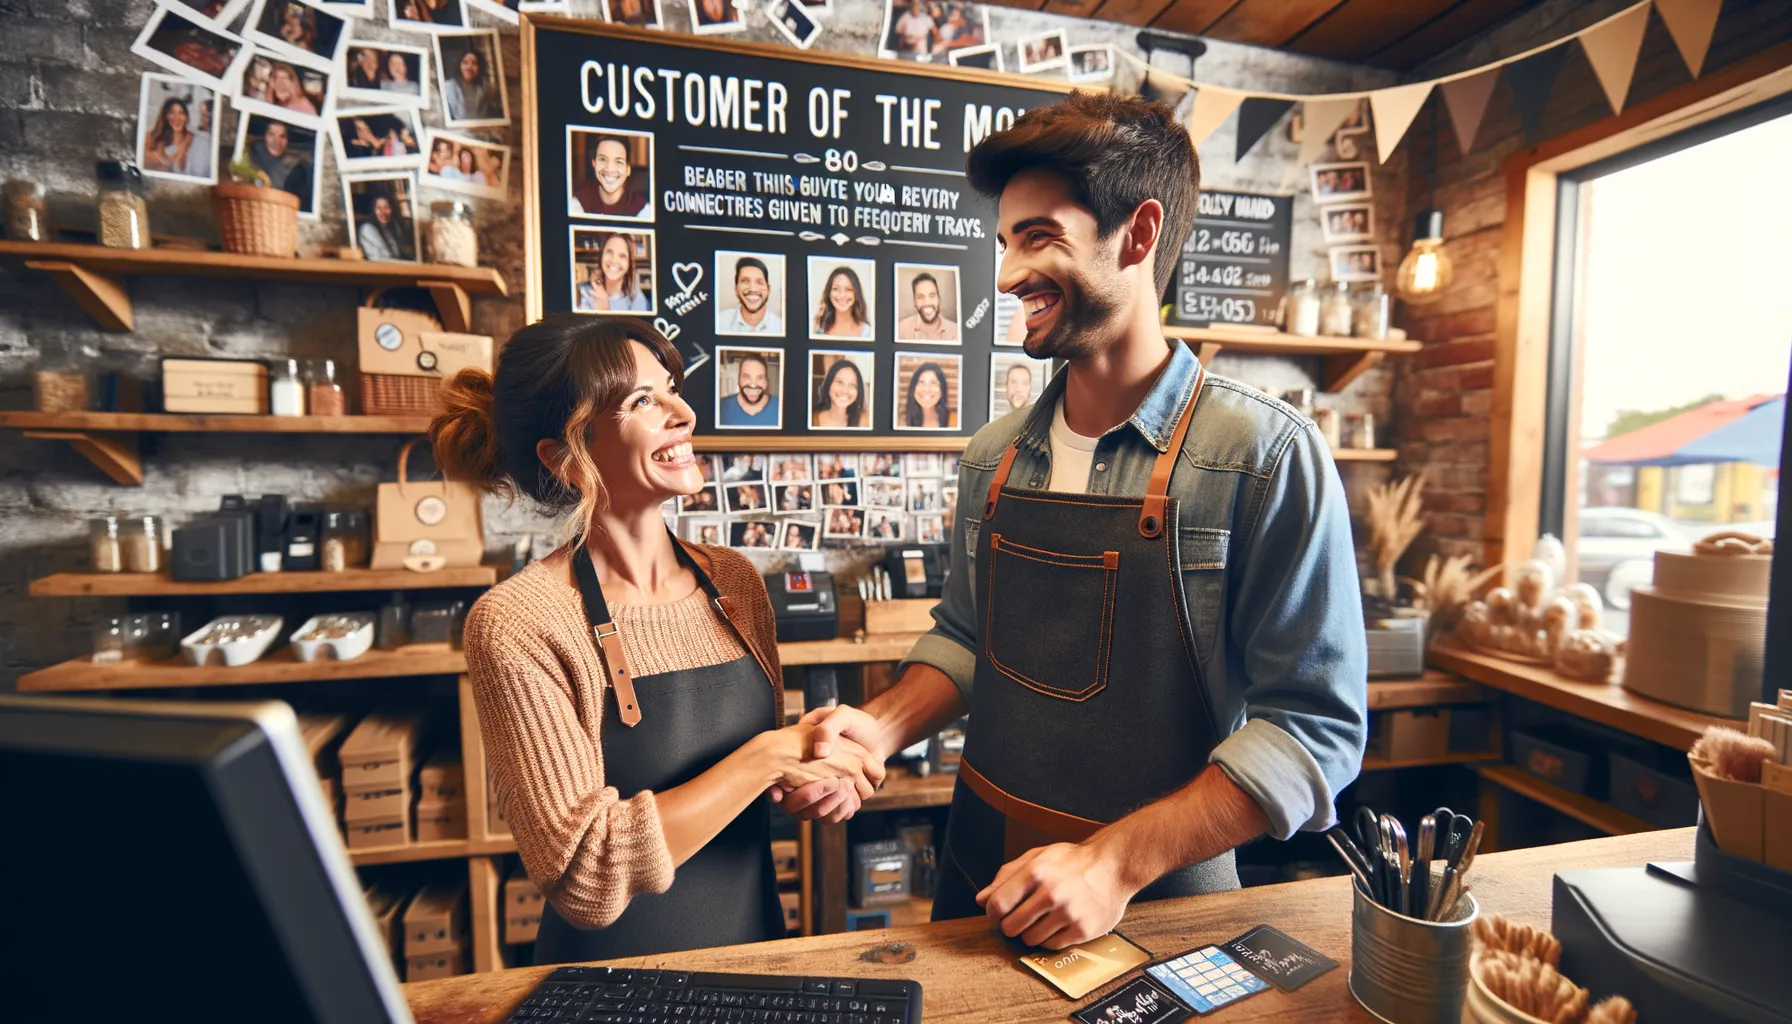 What Strategies to Use to Retain and Reward Your Customers